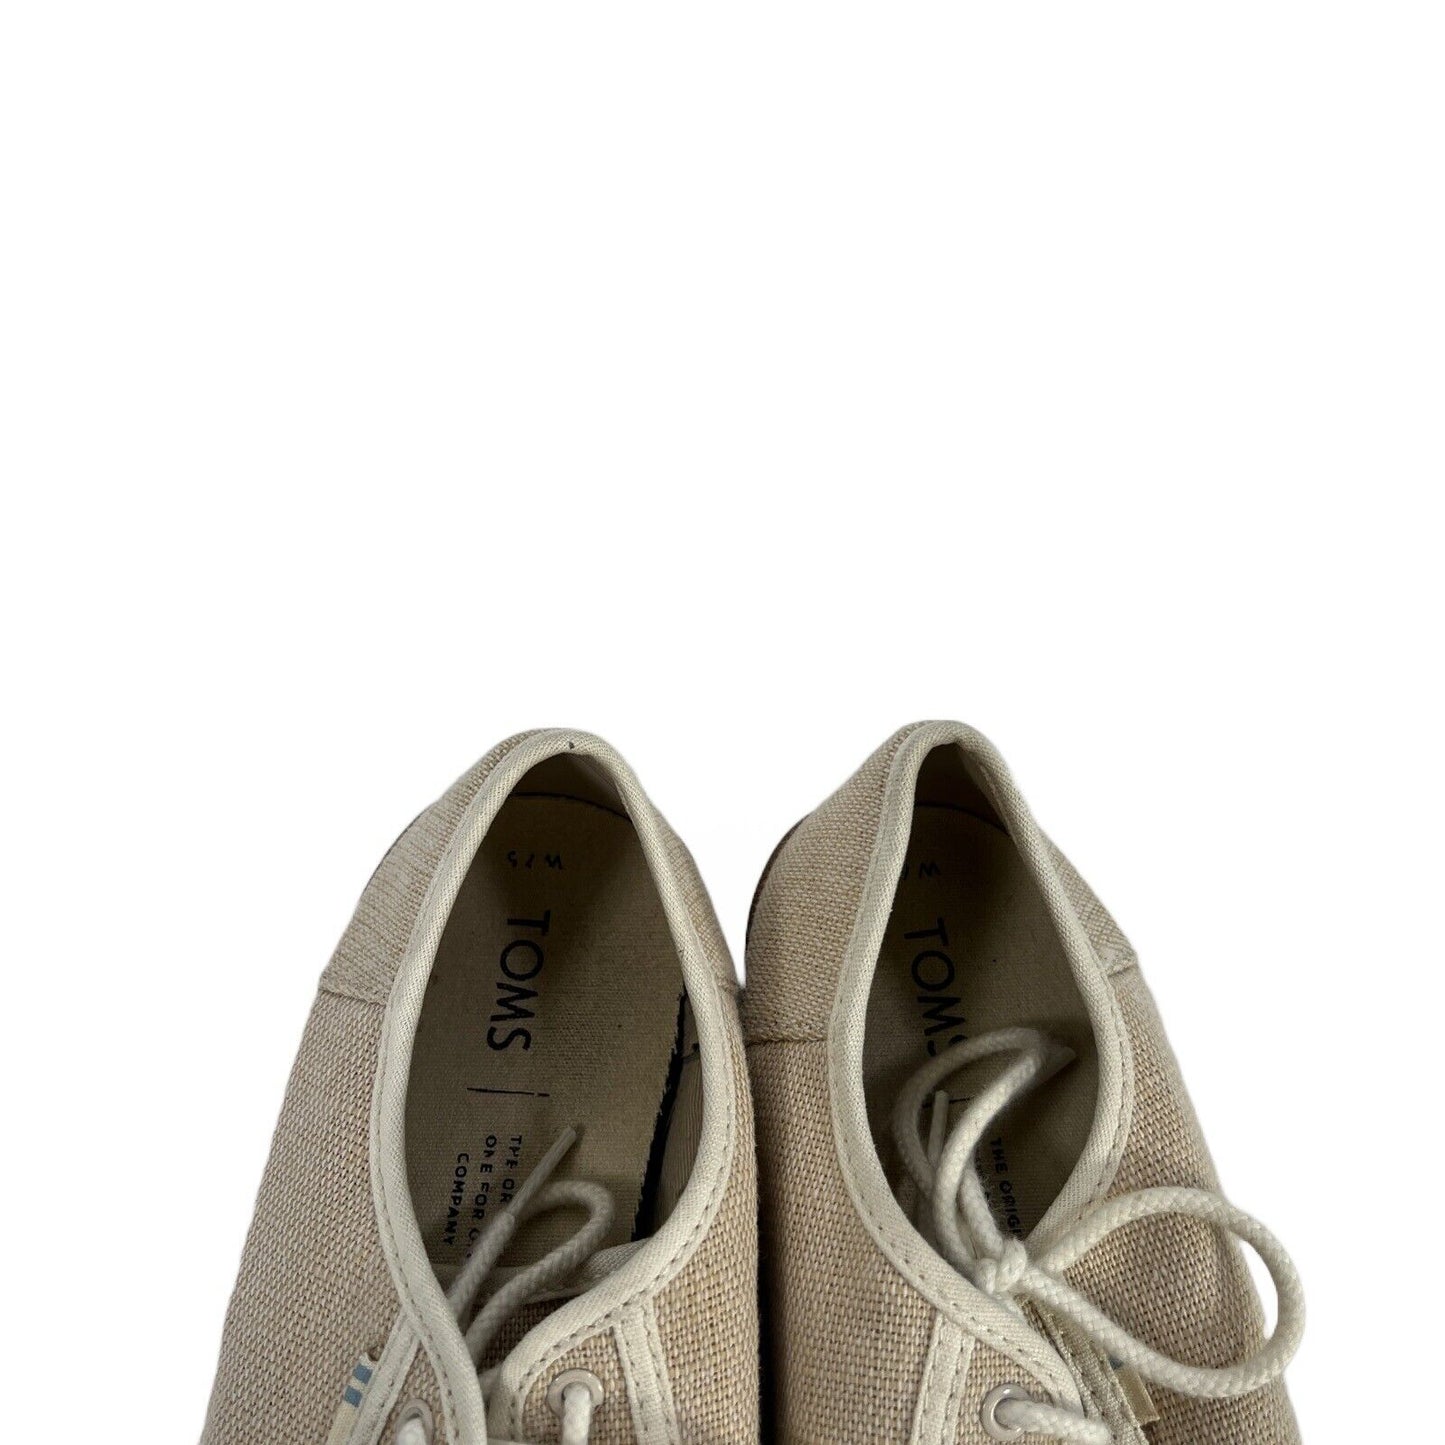 Toms Women's Beige/Tan Textile Lace Up Casual Sneakers - 7.5